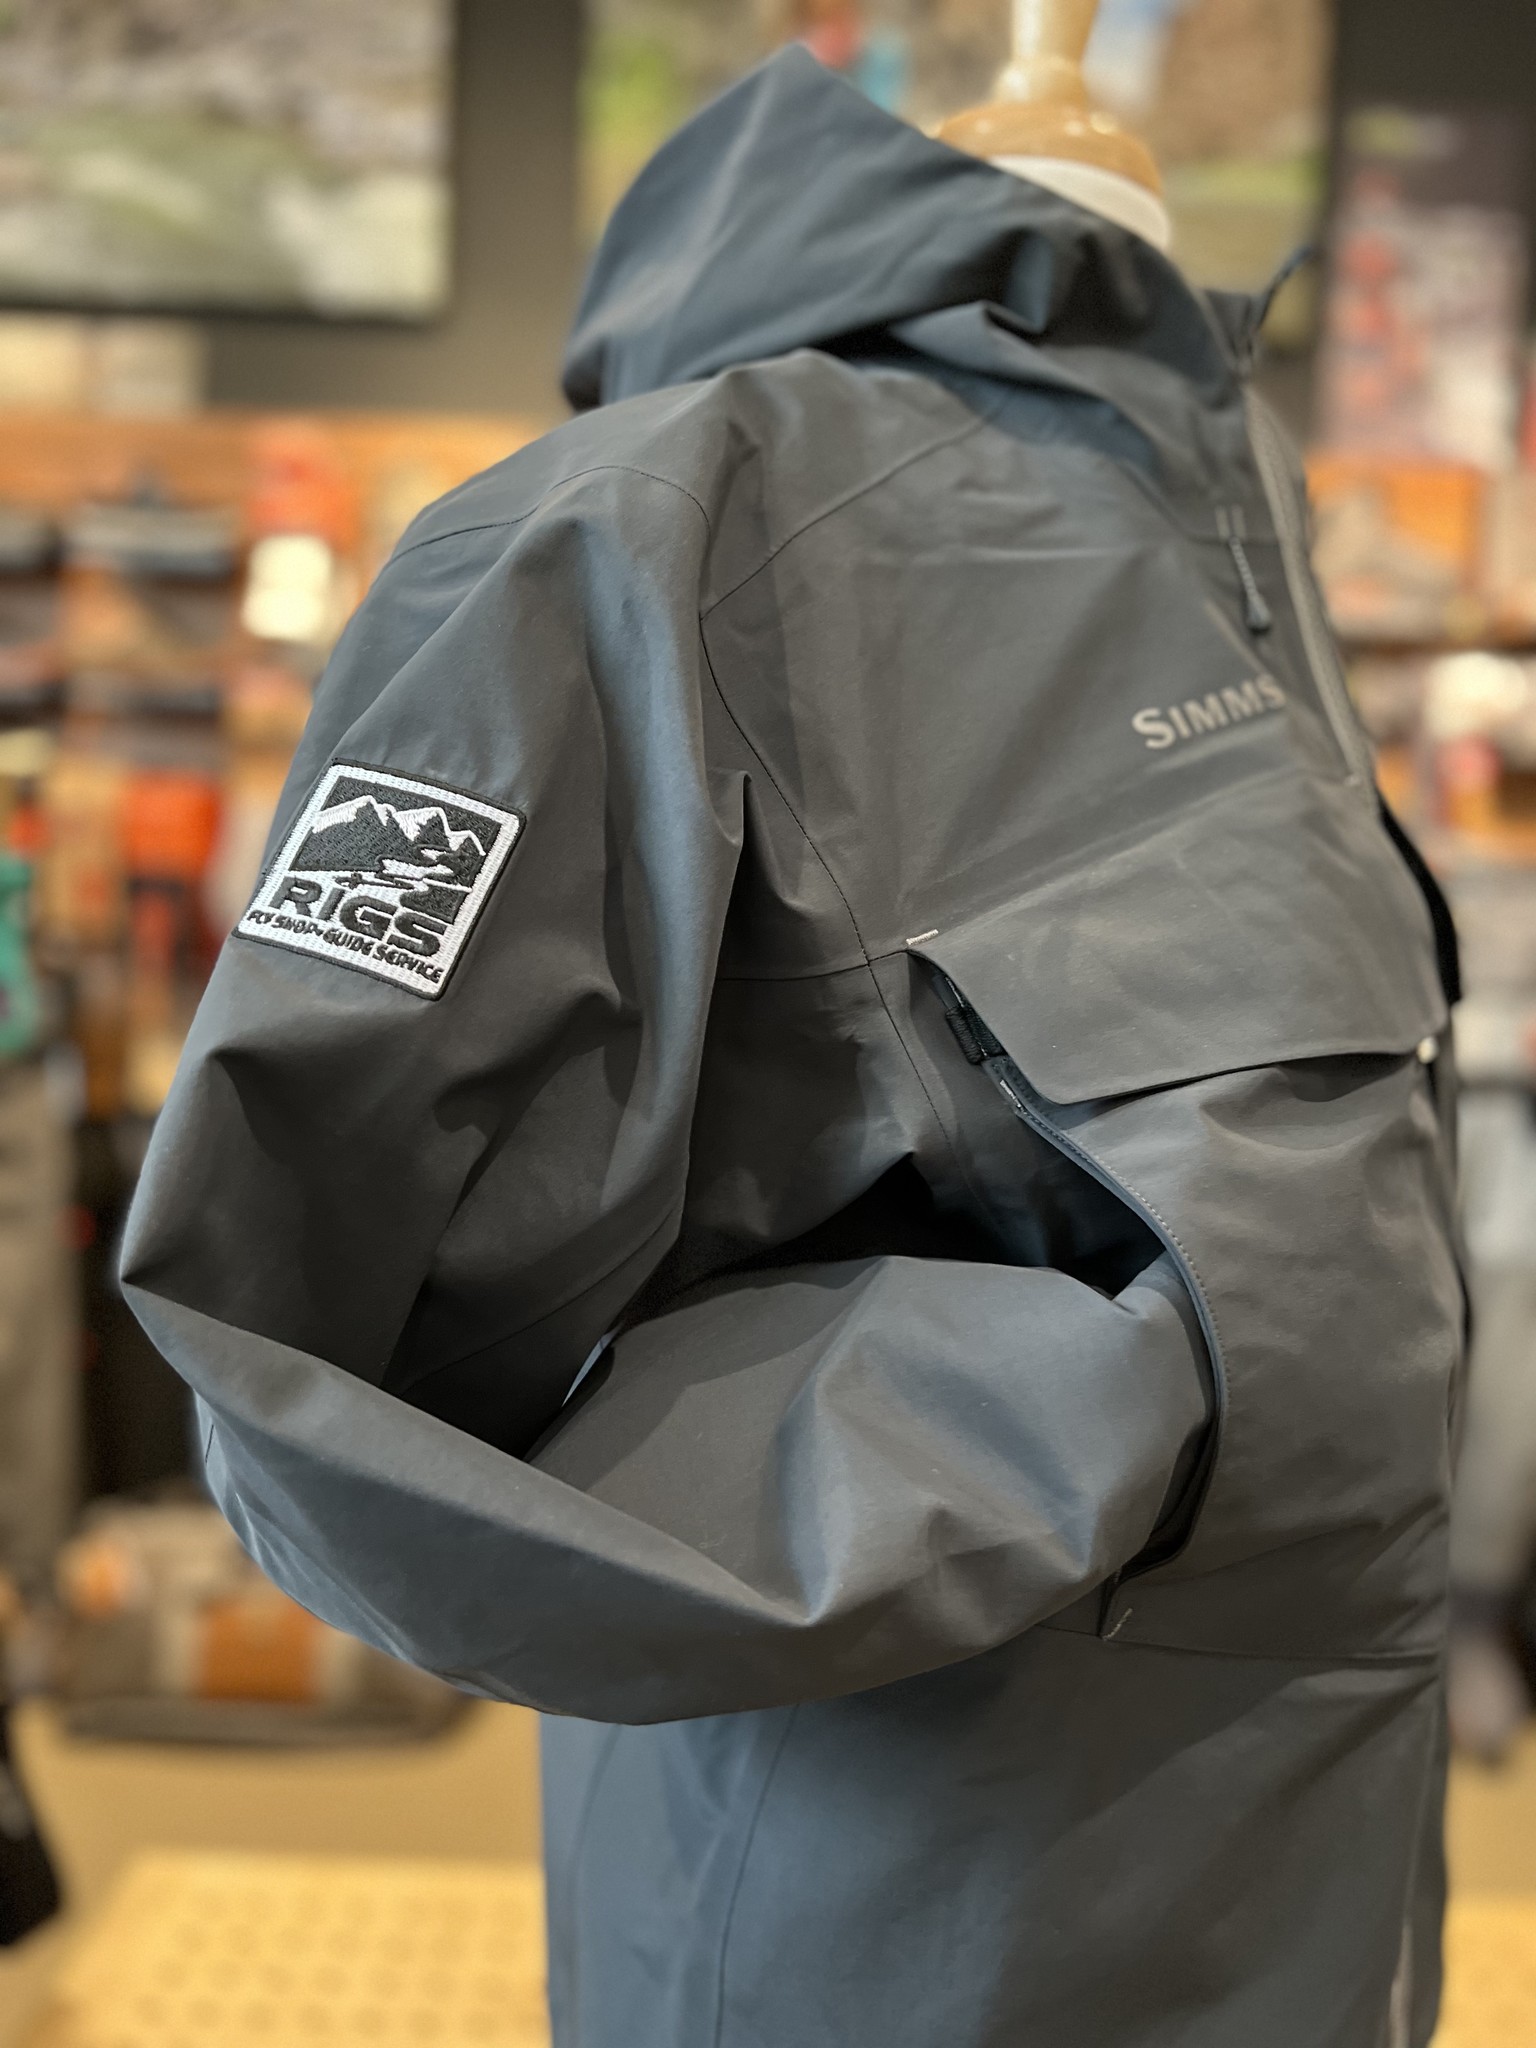 Simms RIGS Logo Guide Classic Jacket - RIGS Fly Shop